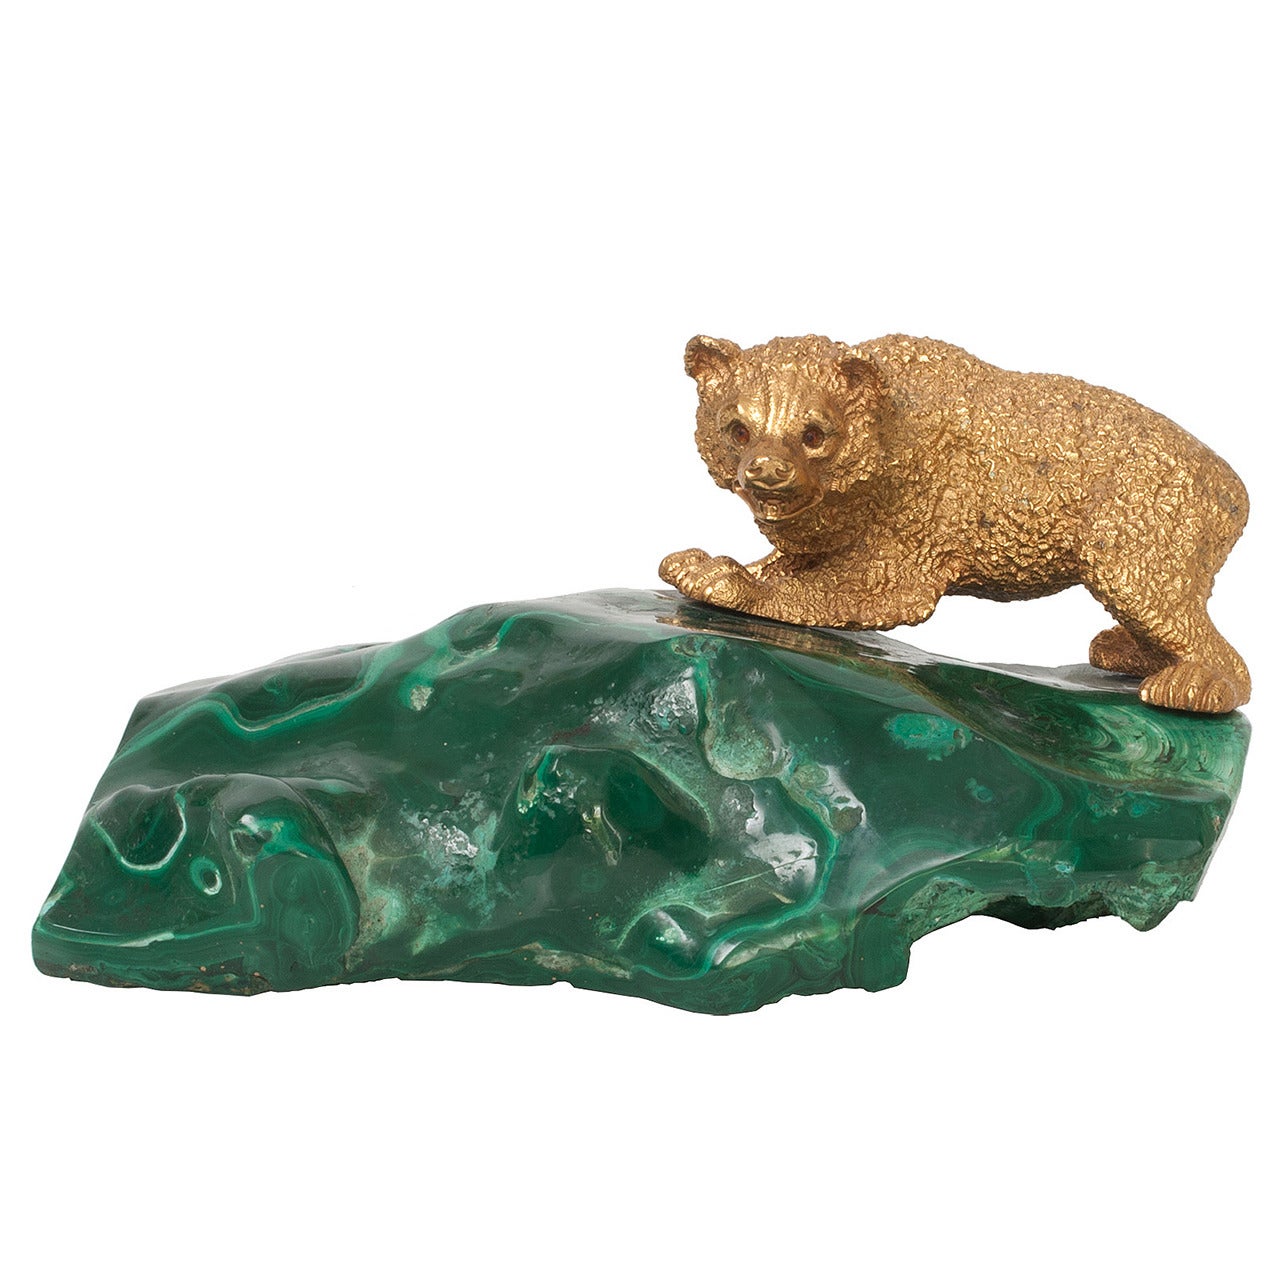 Russian Gilded Bronze Bear Cub Sculpture on a Sold Piece of Malachite